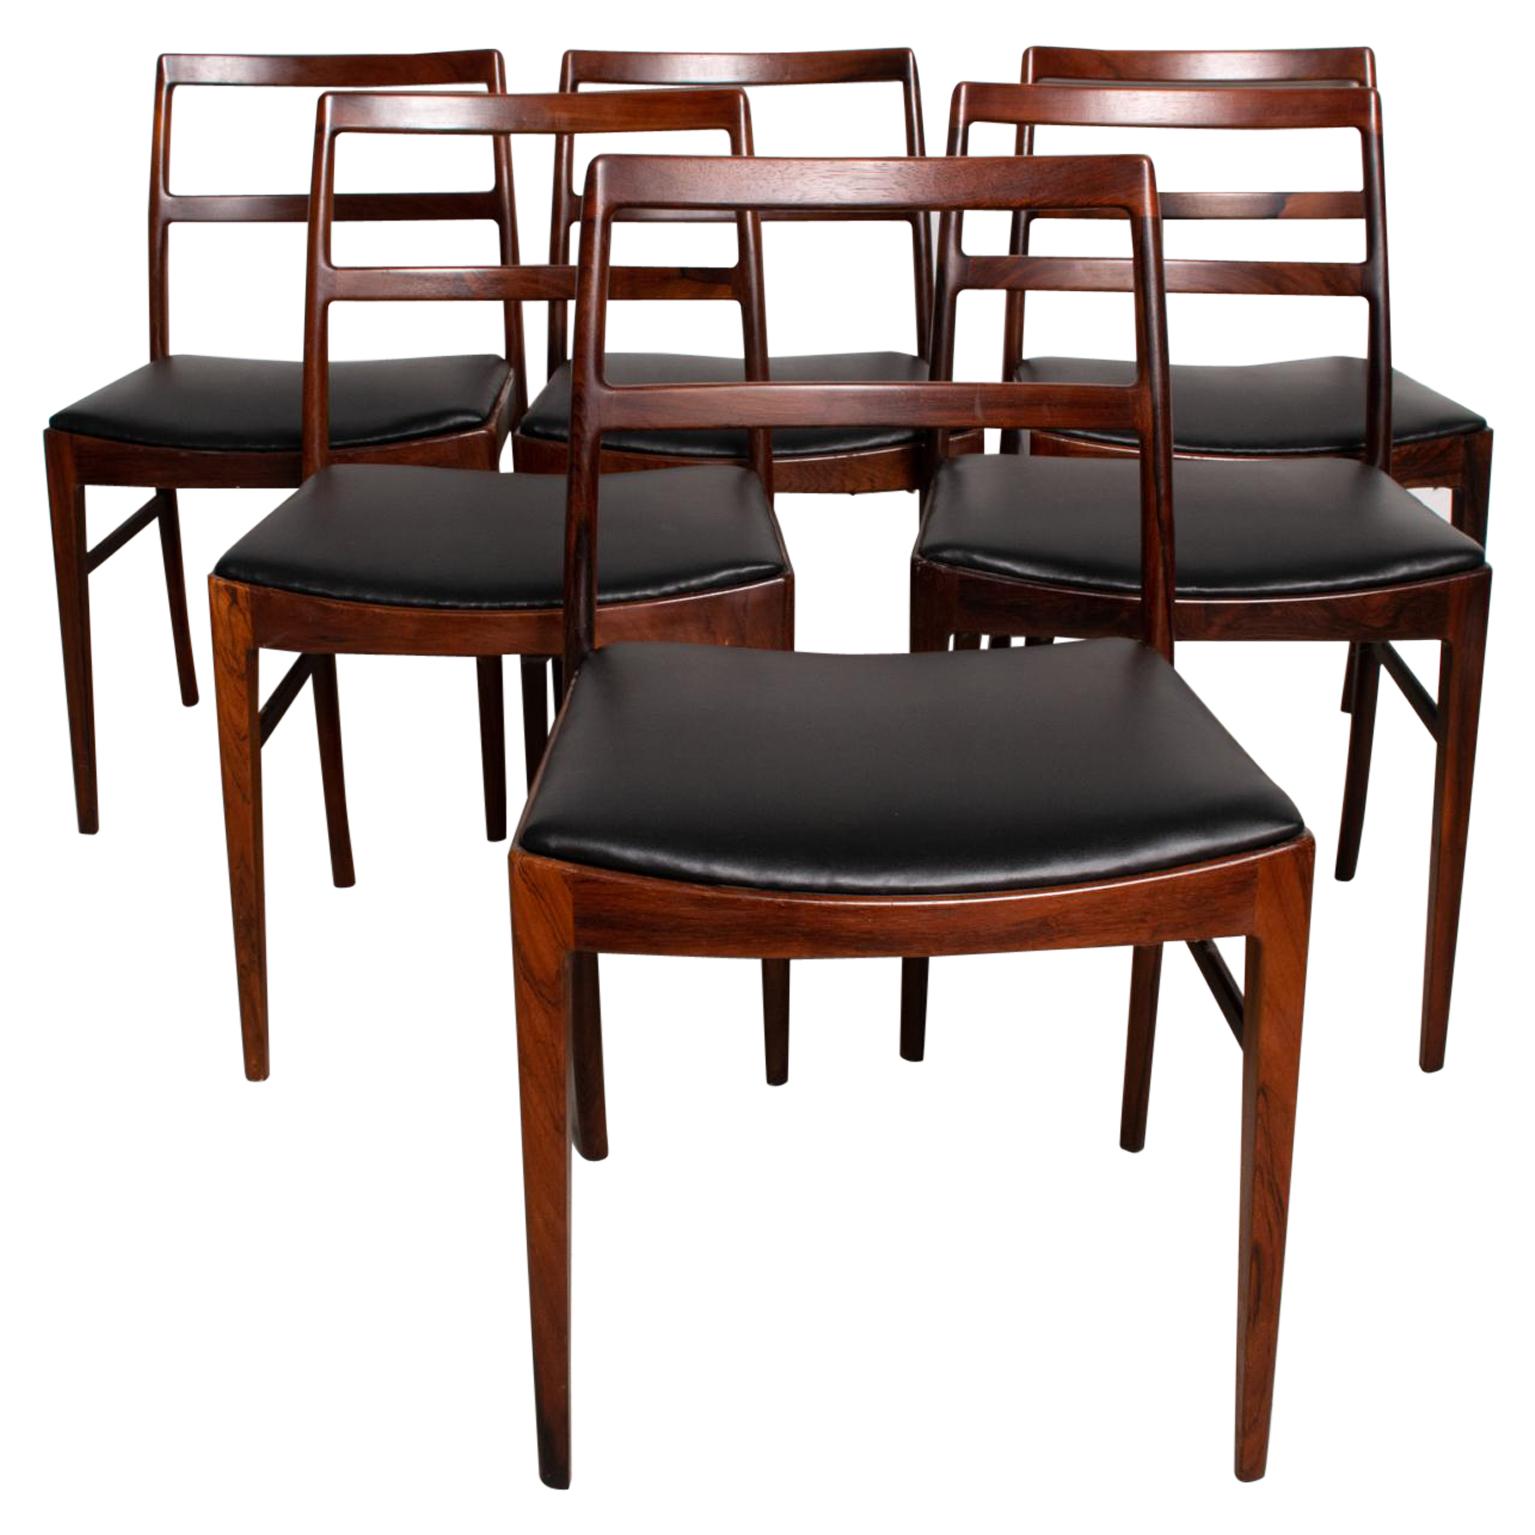 Midcentury Danish Modern Set of 6 Dining Chairs by Arne Vodder for Sibast 430